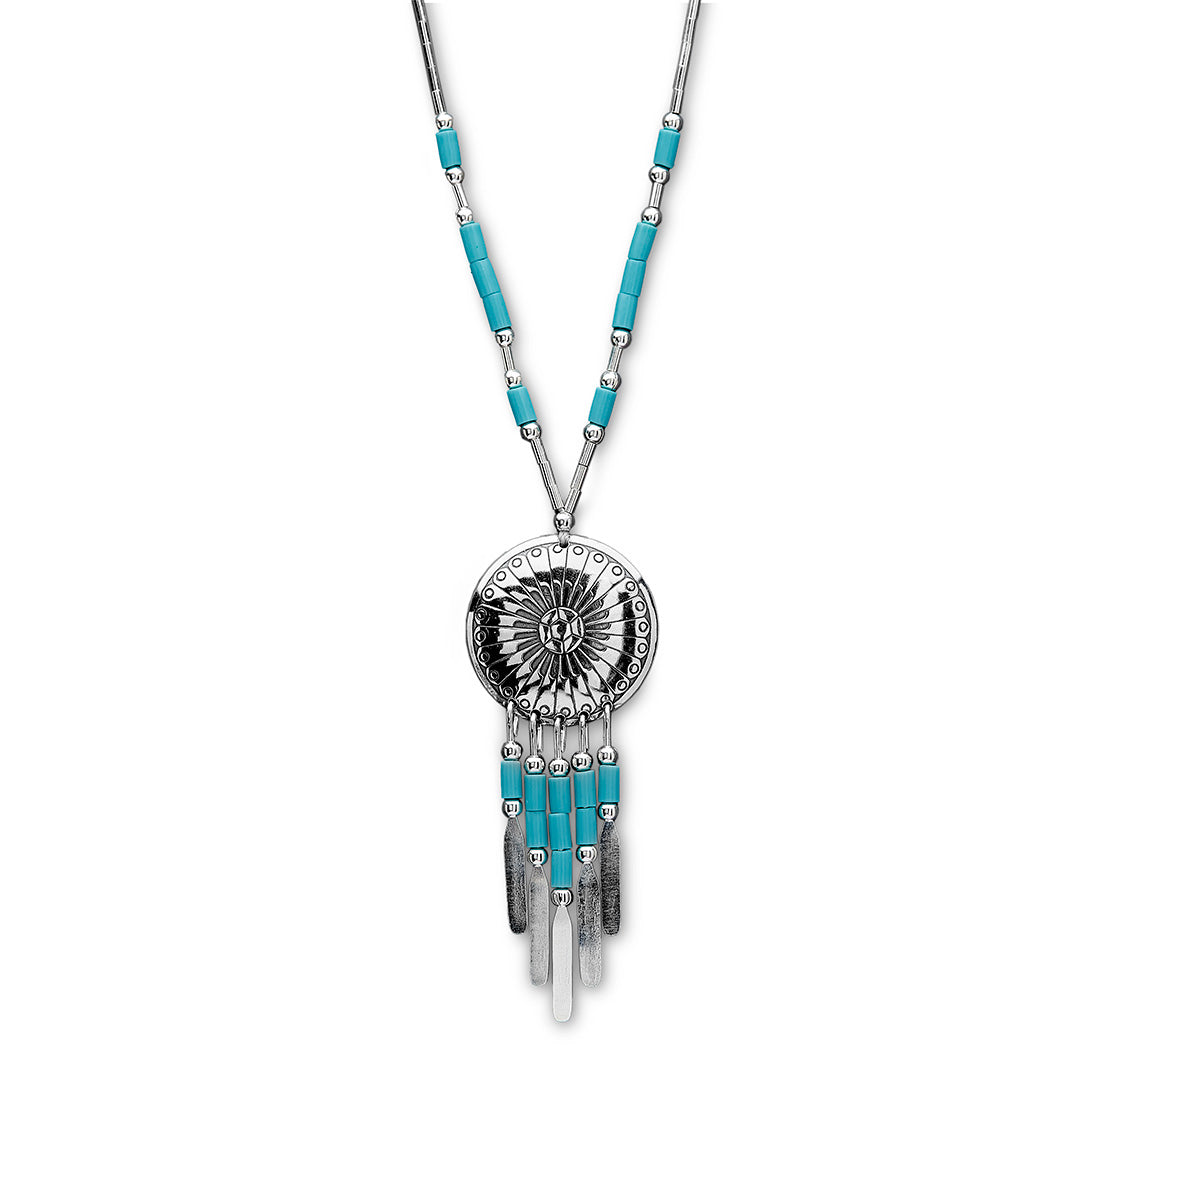 Native American 'Concho' style Turquoise and Silver Beaded Necklace